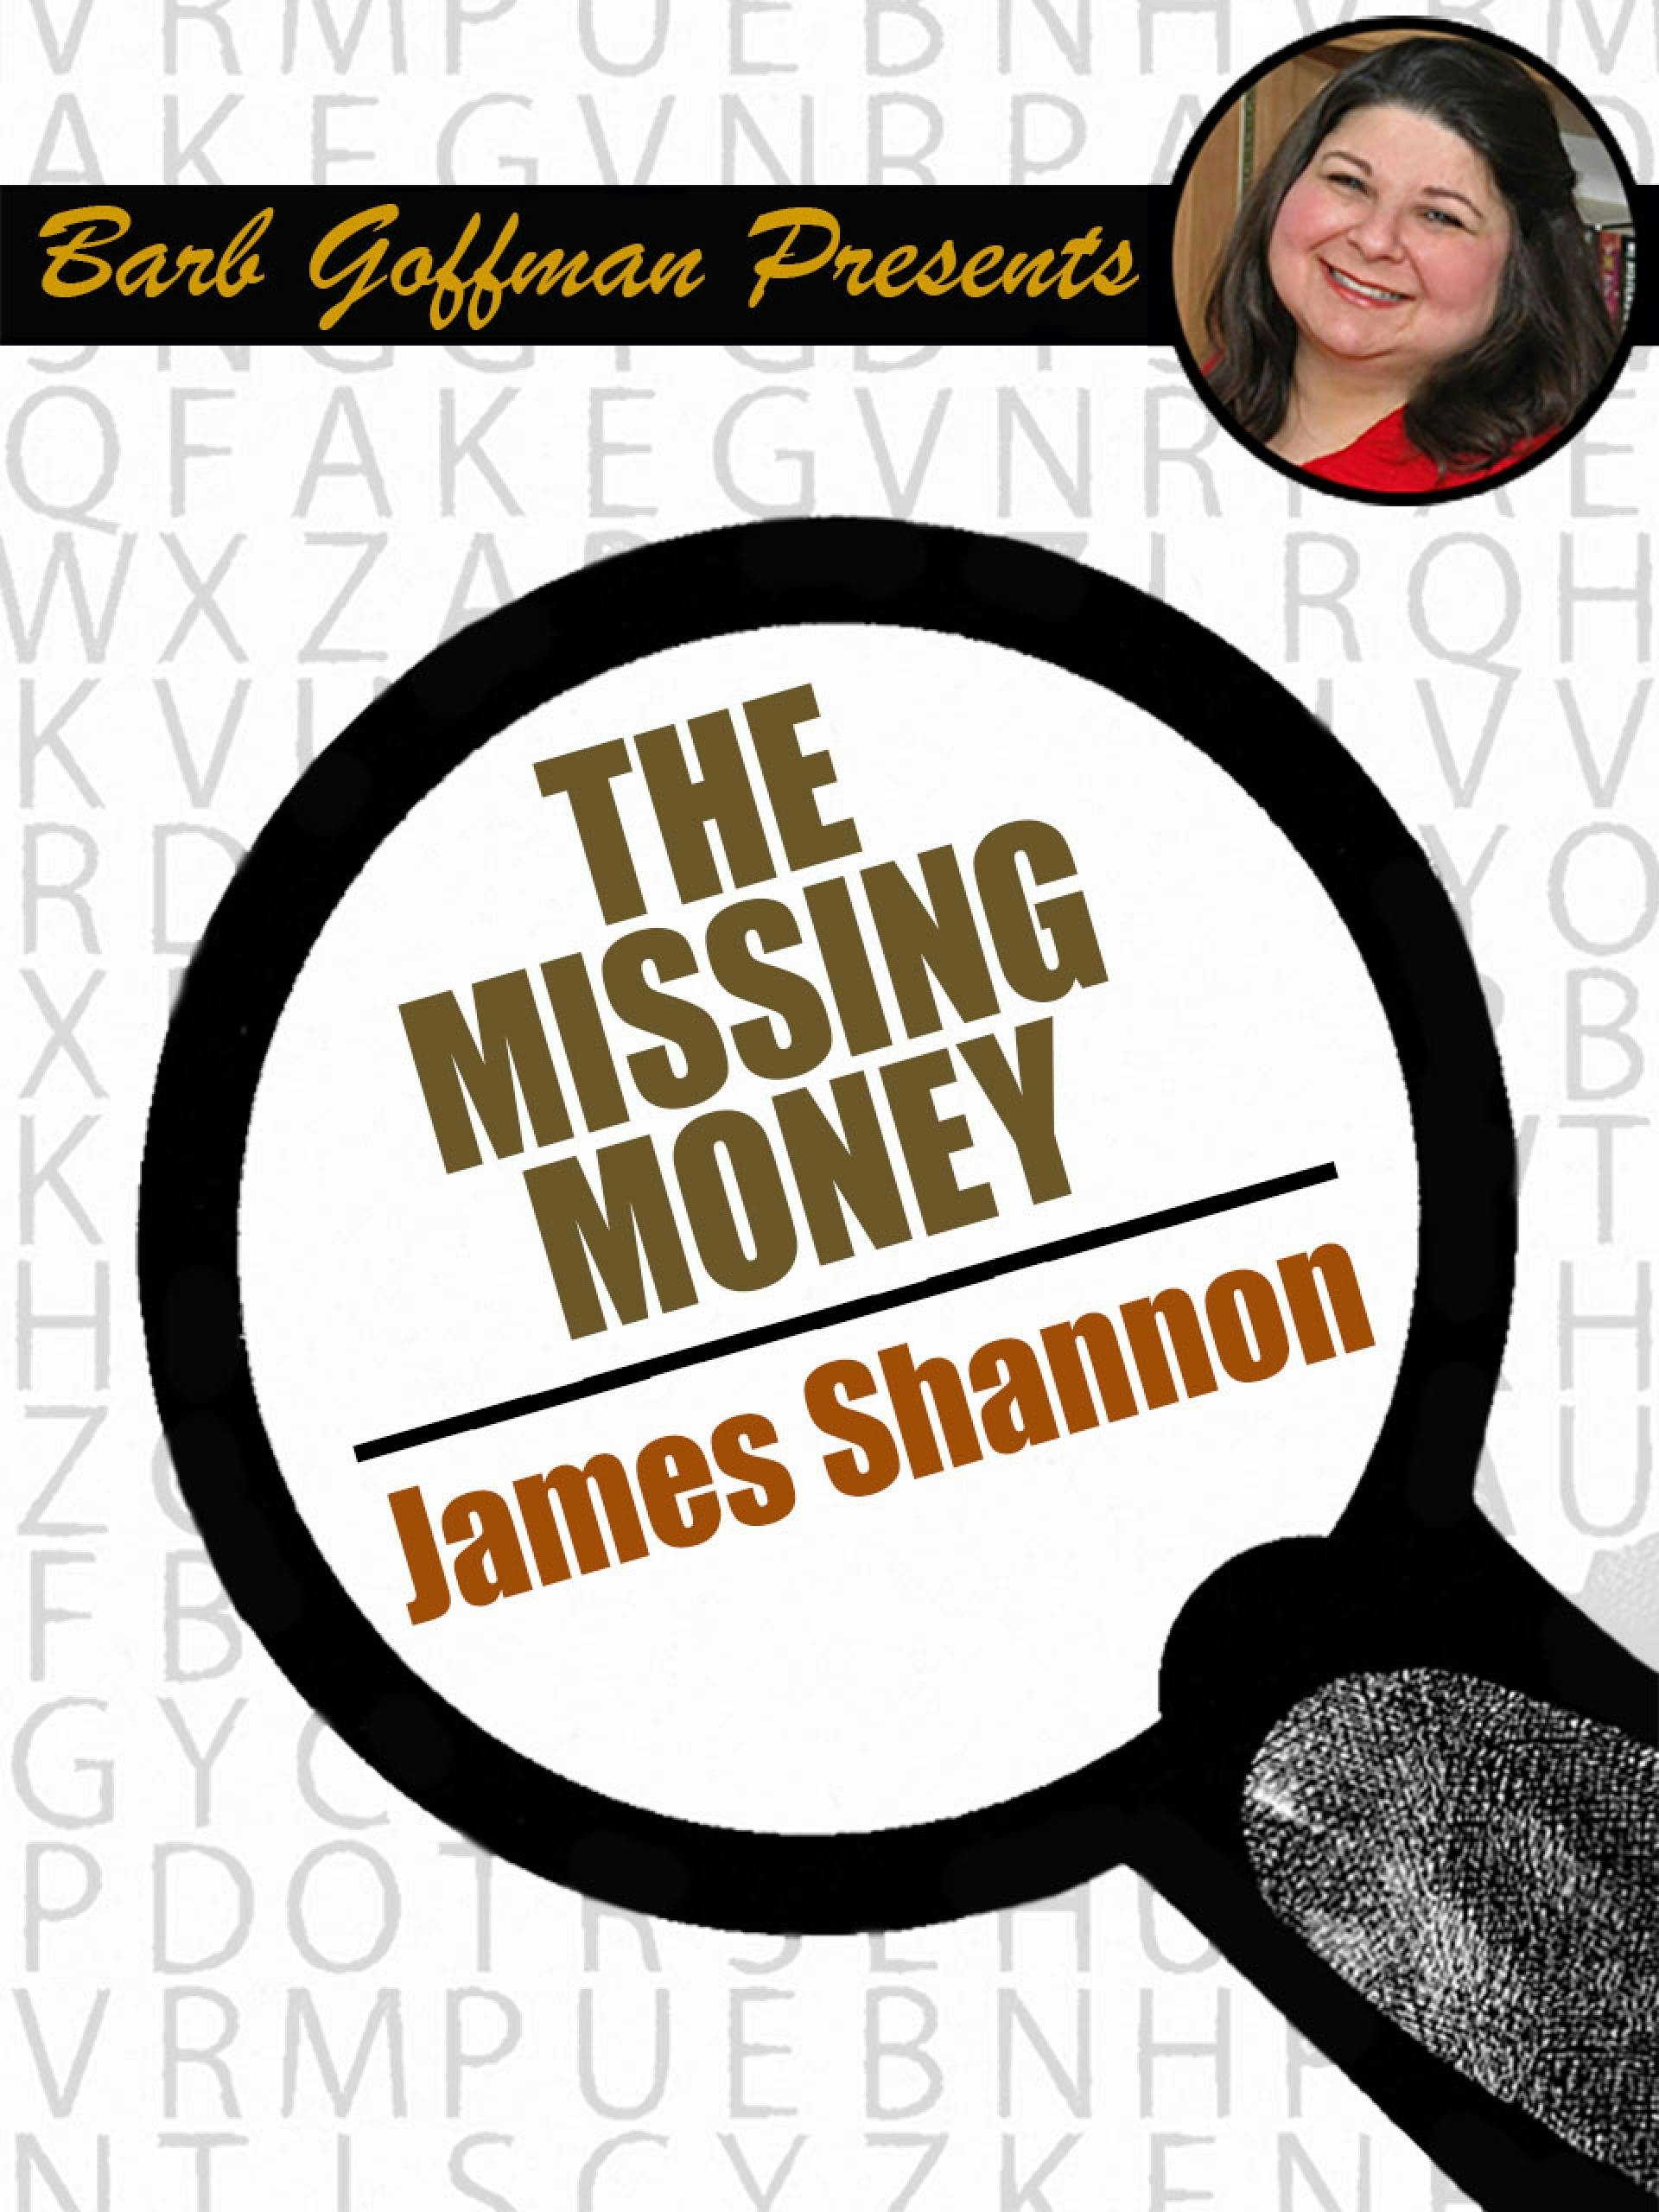 The Missing Money - James Shannon